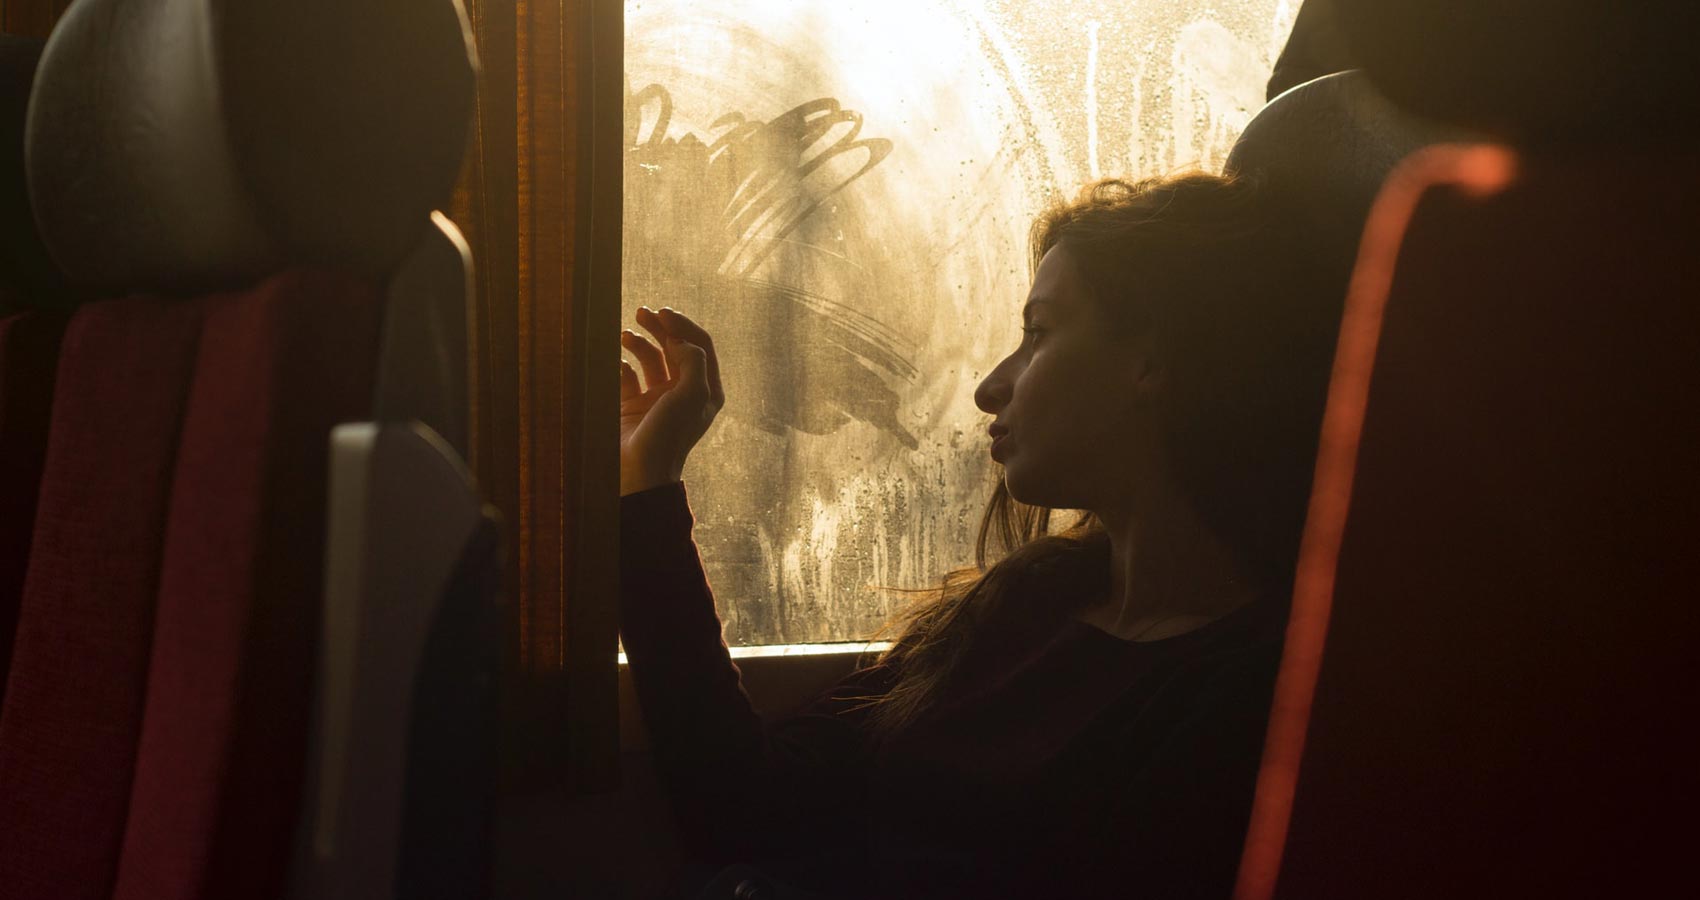 A Ride On The Train, poetry by Shweta Meraki at Spillwords.com